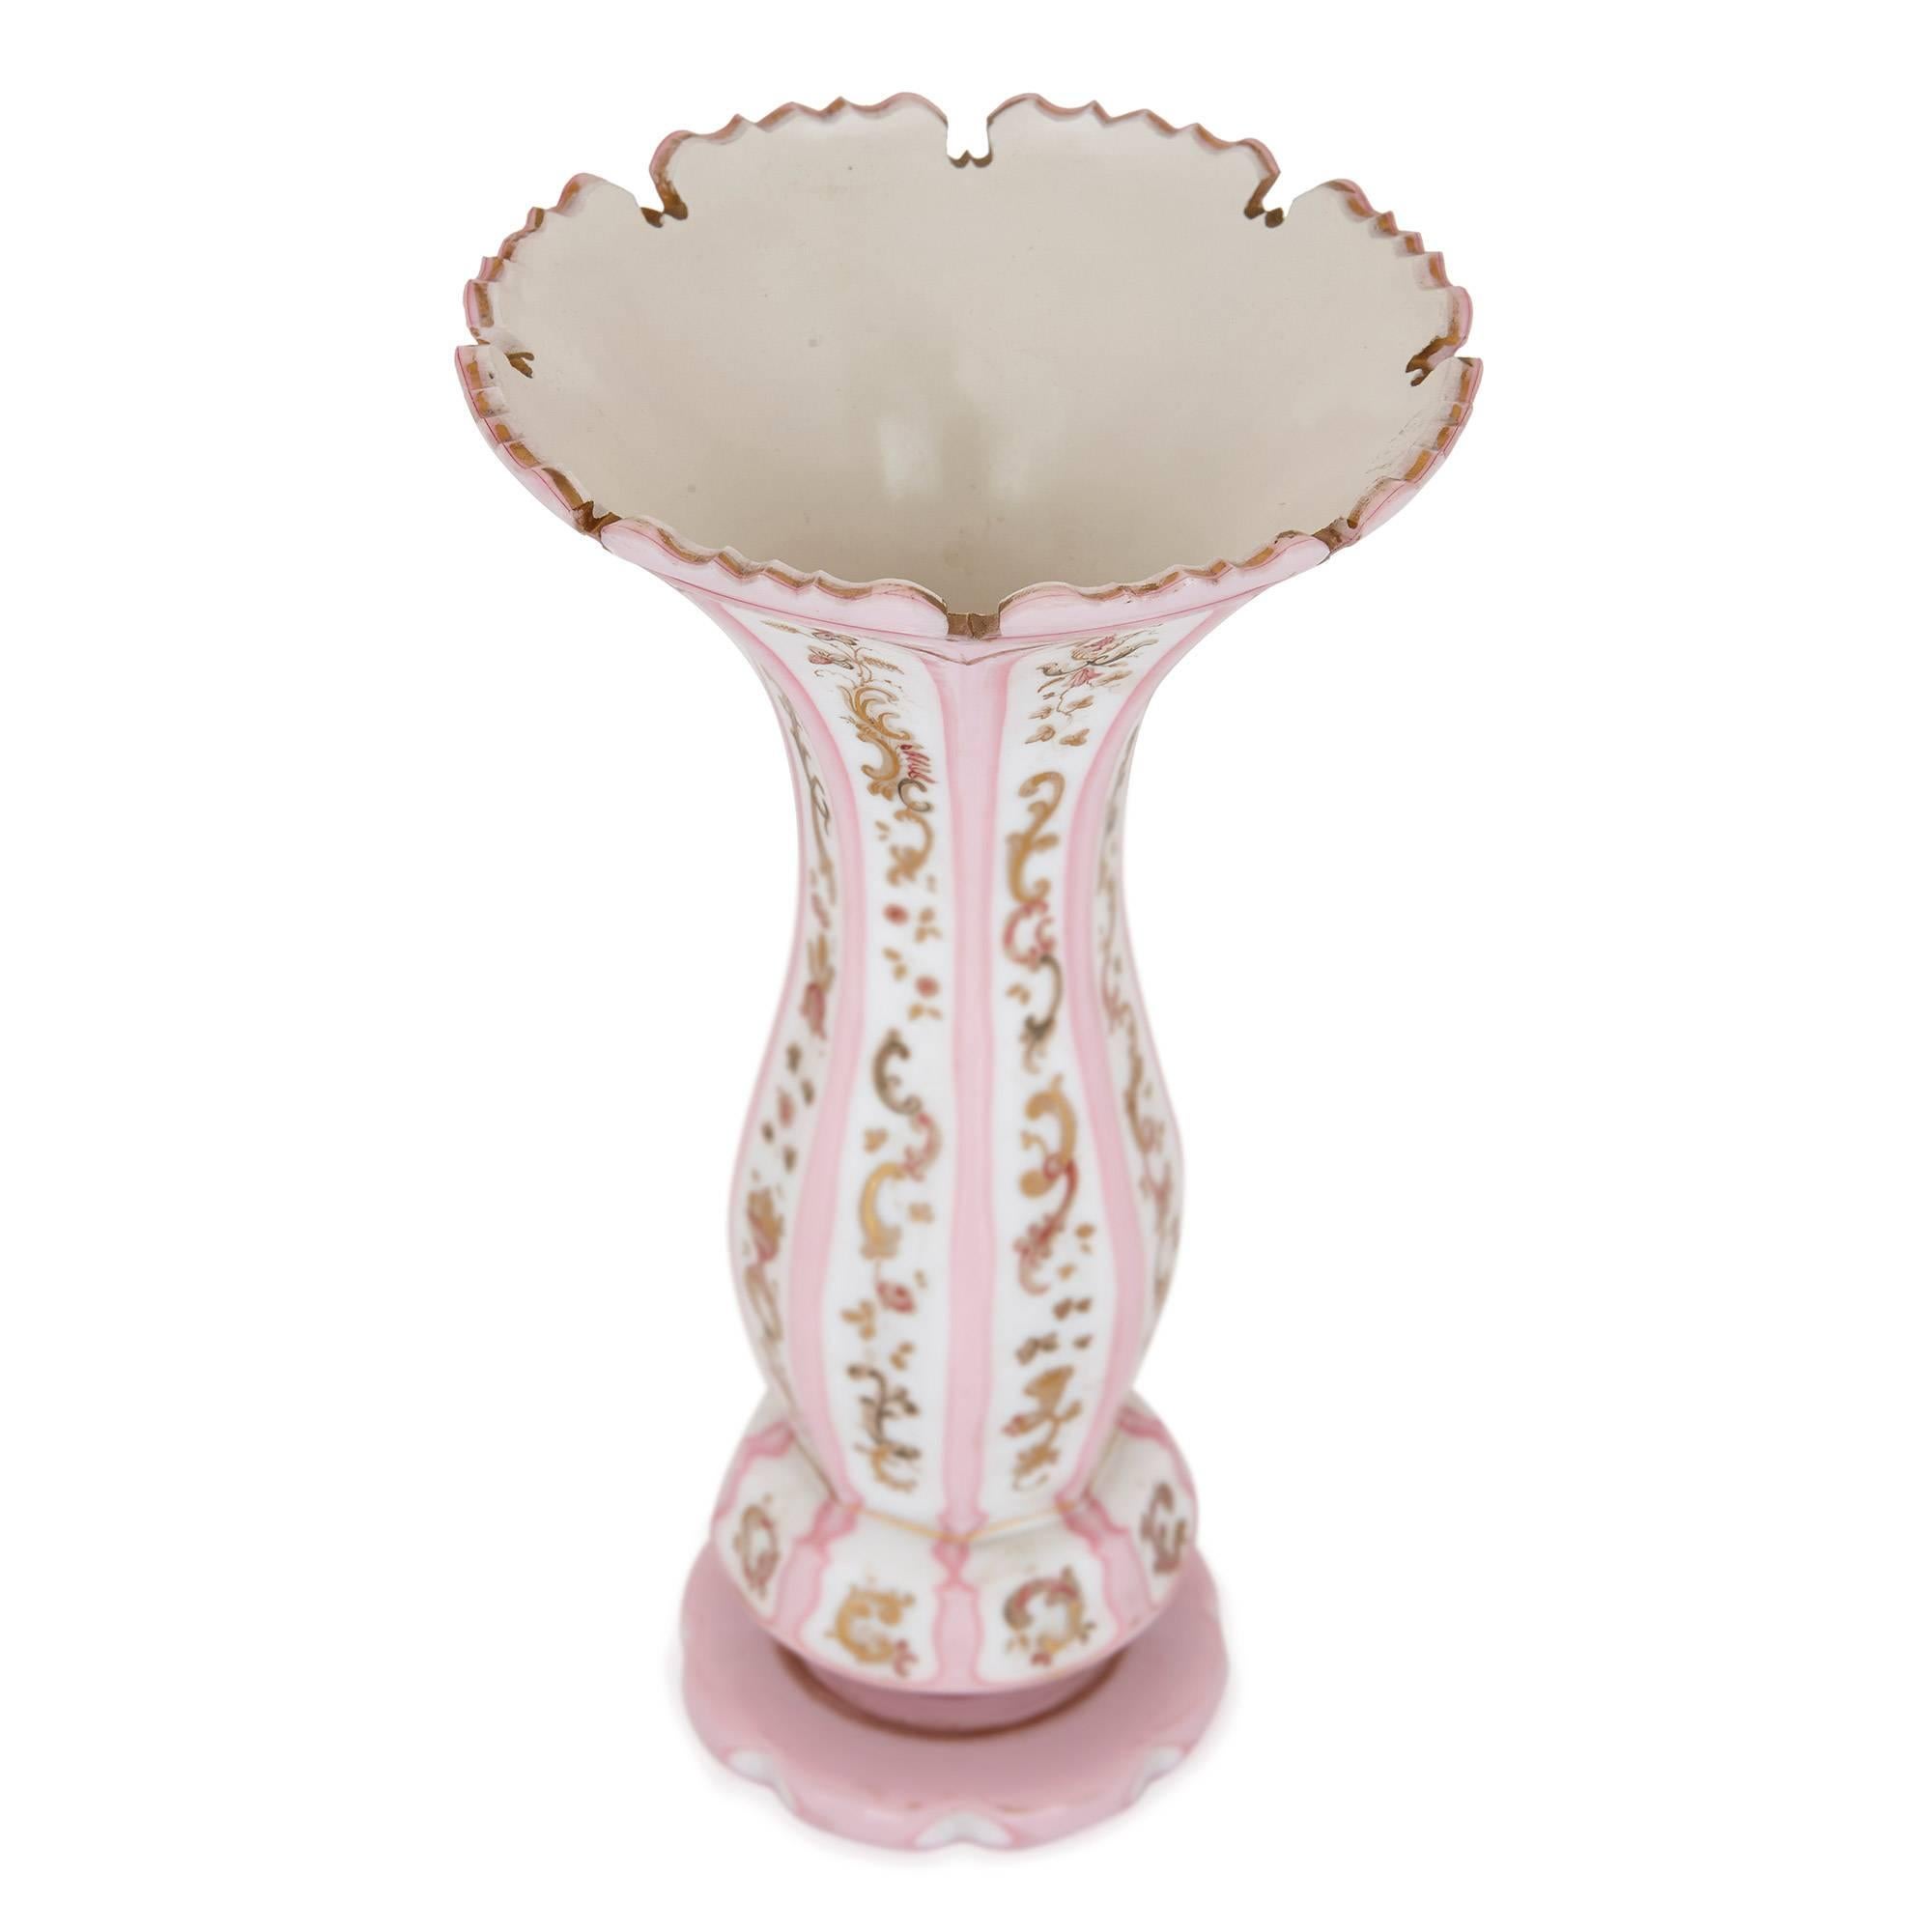 This slender, elegant glass vase is testament to the quality of Bohemian glass-making in the 19th century. Featuring parcel-gilt detailing and a white and pink color palette, this vase is well suited to a range of interior styles and settings. The